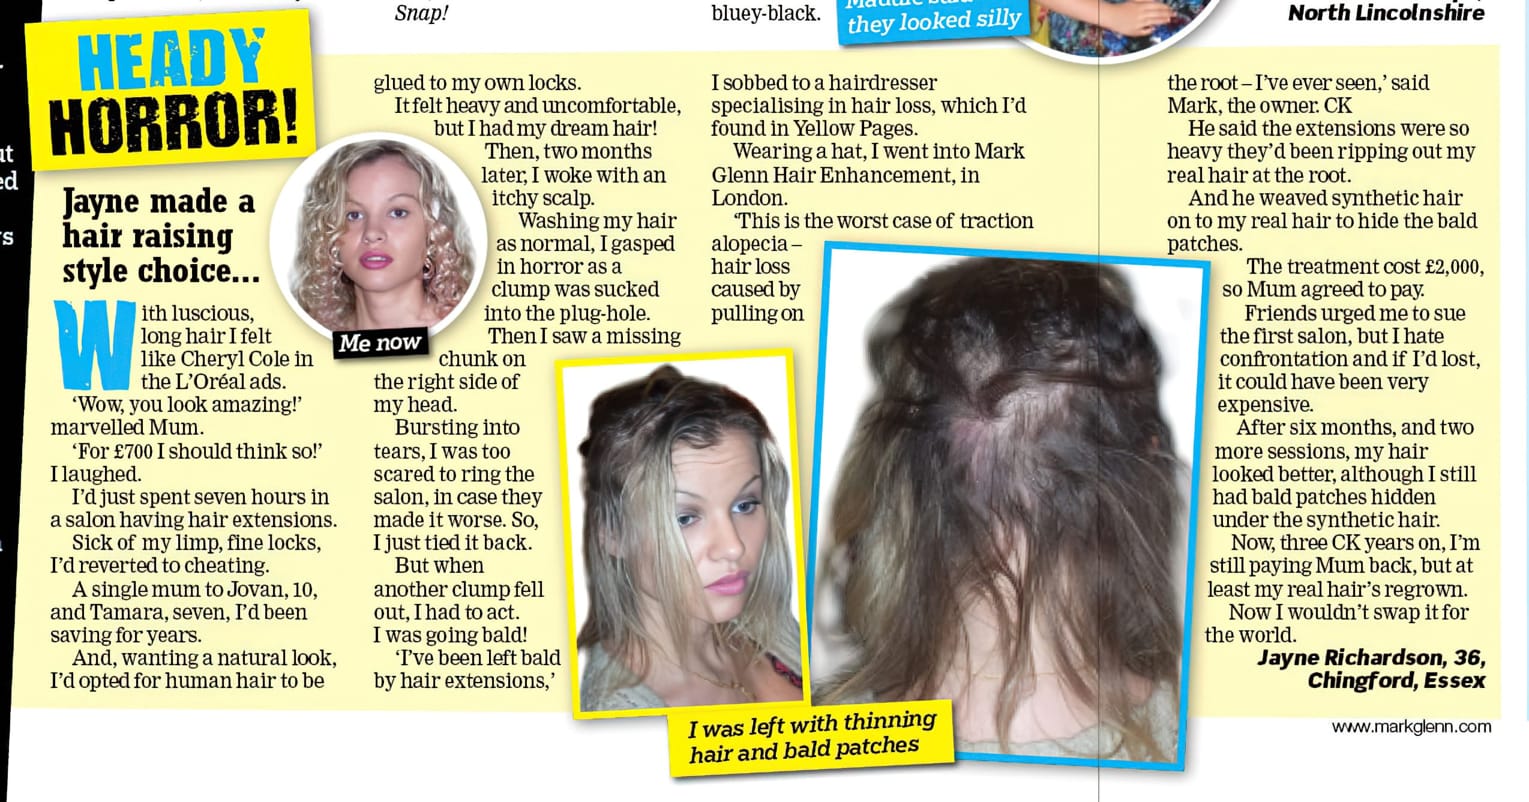 'Heady Horror' - Real Hair Extension Damage Saved by Mark Glenn - Real People Magazine